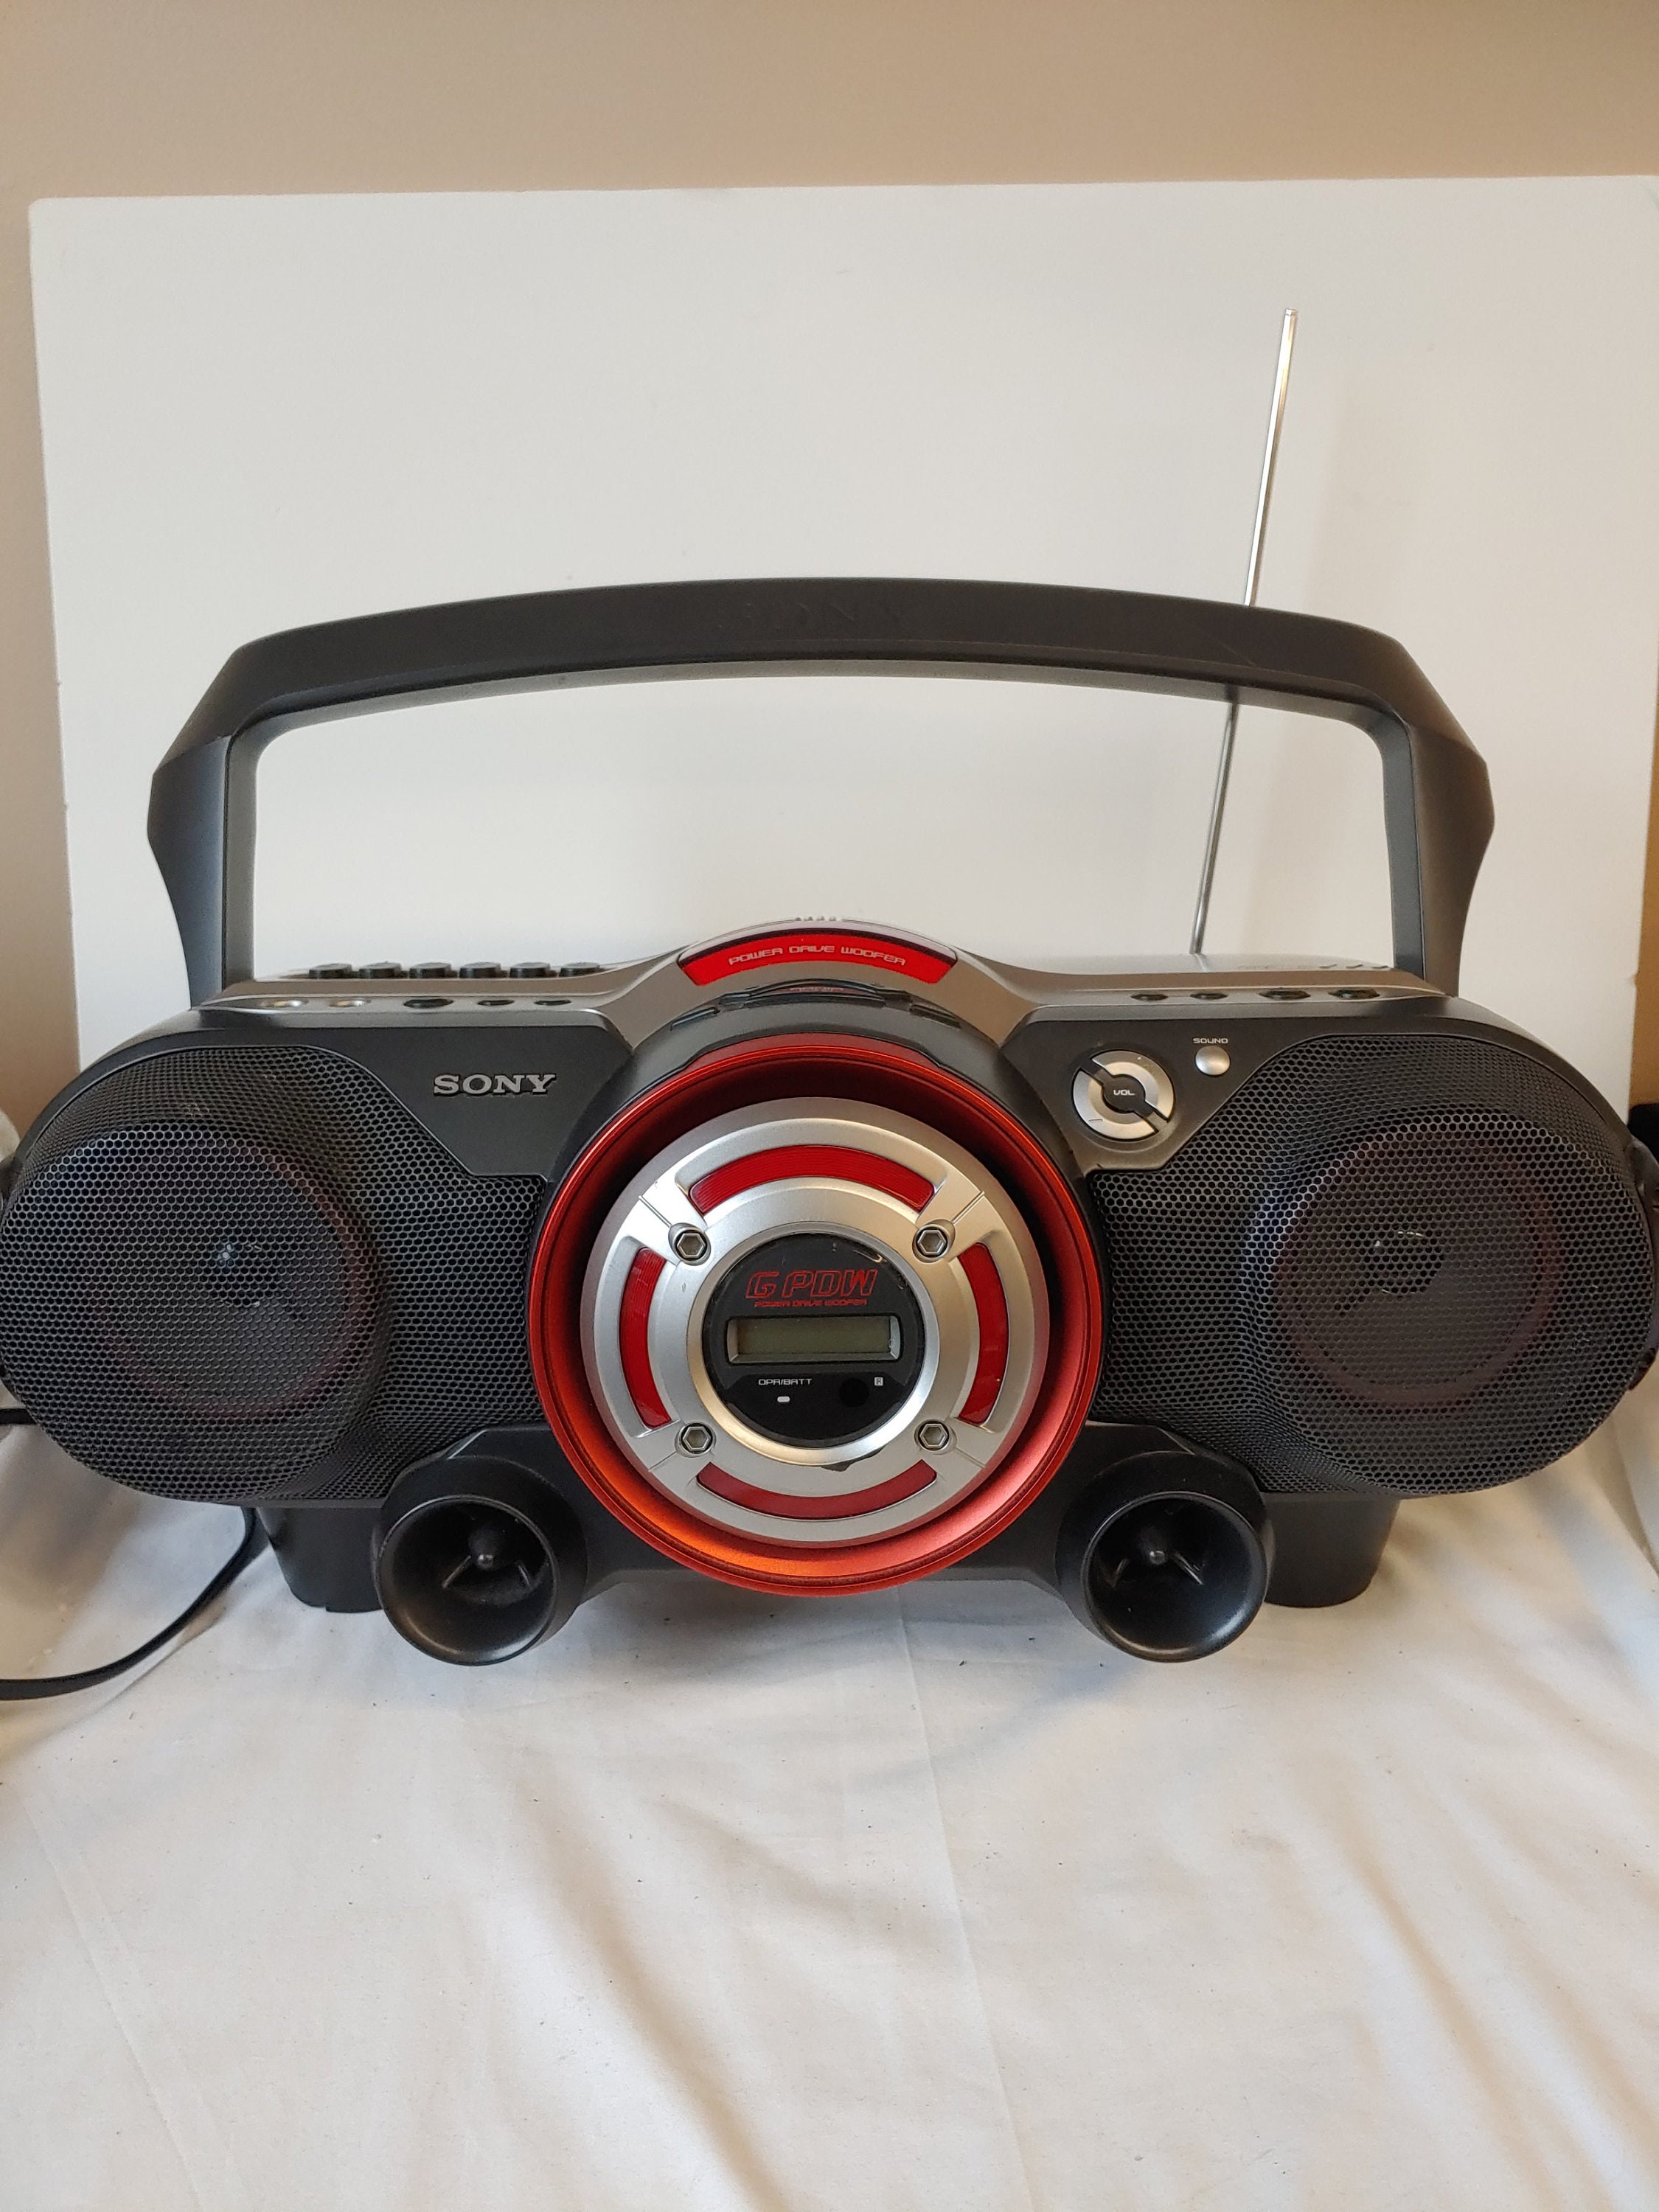 Sony CFD-G500 Stereo Cd/radio/cassette Boombox G PDW Power Etsy Norway